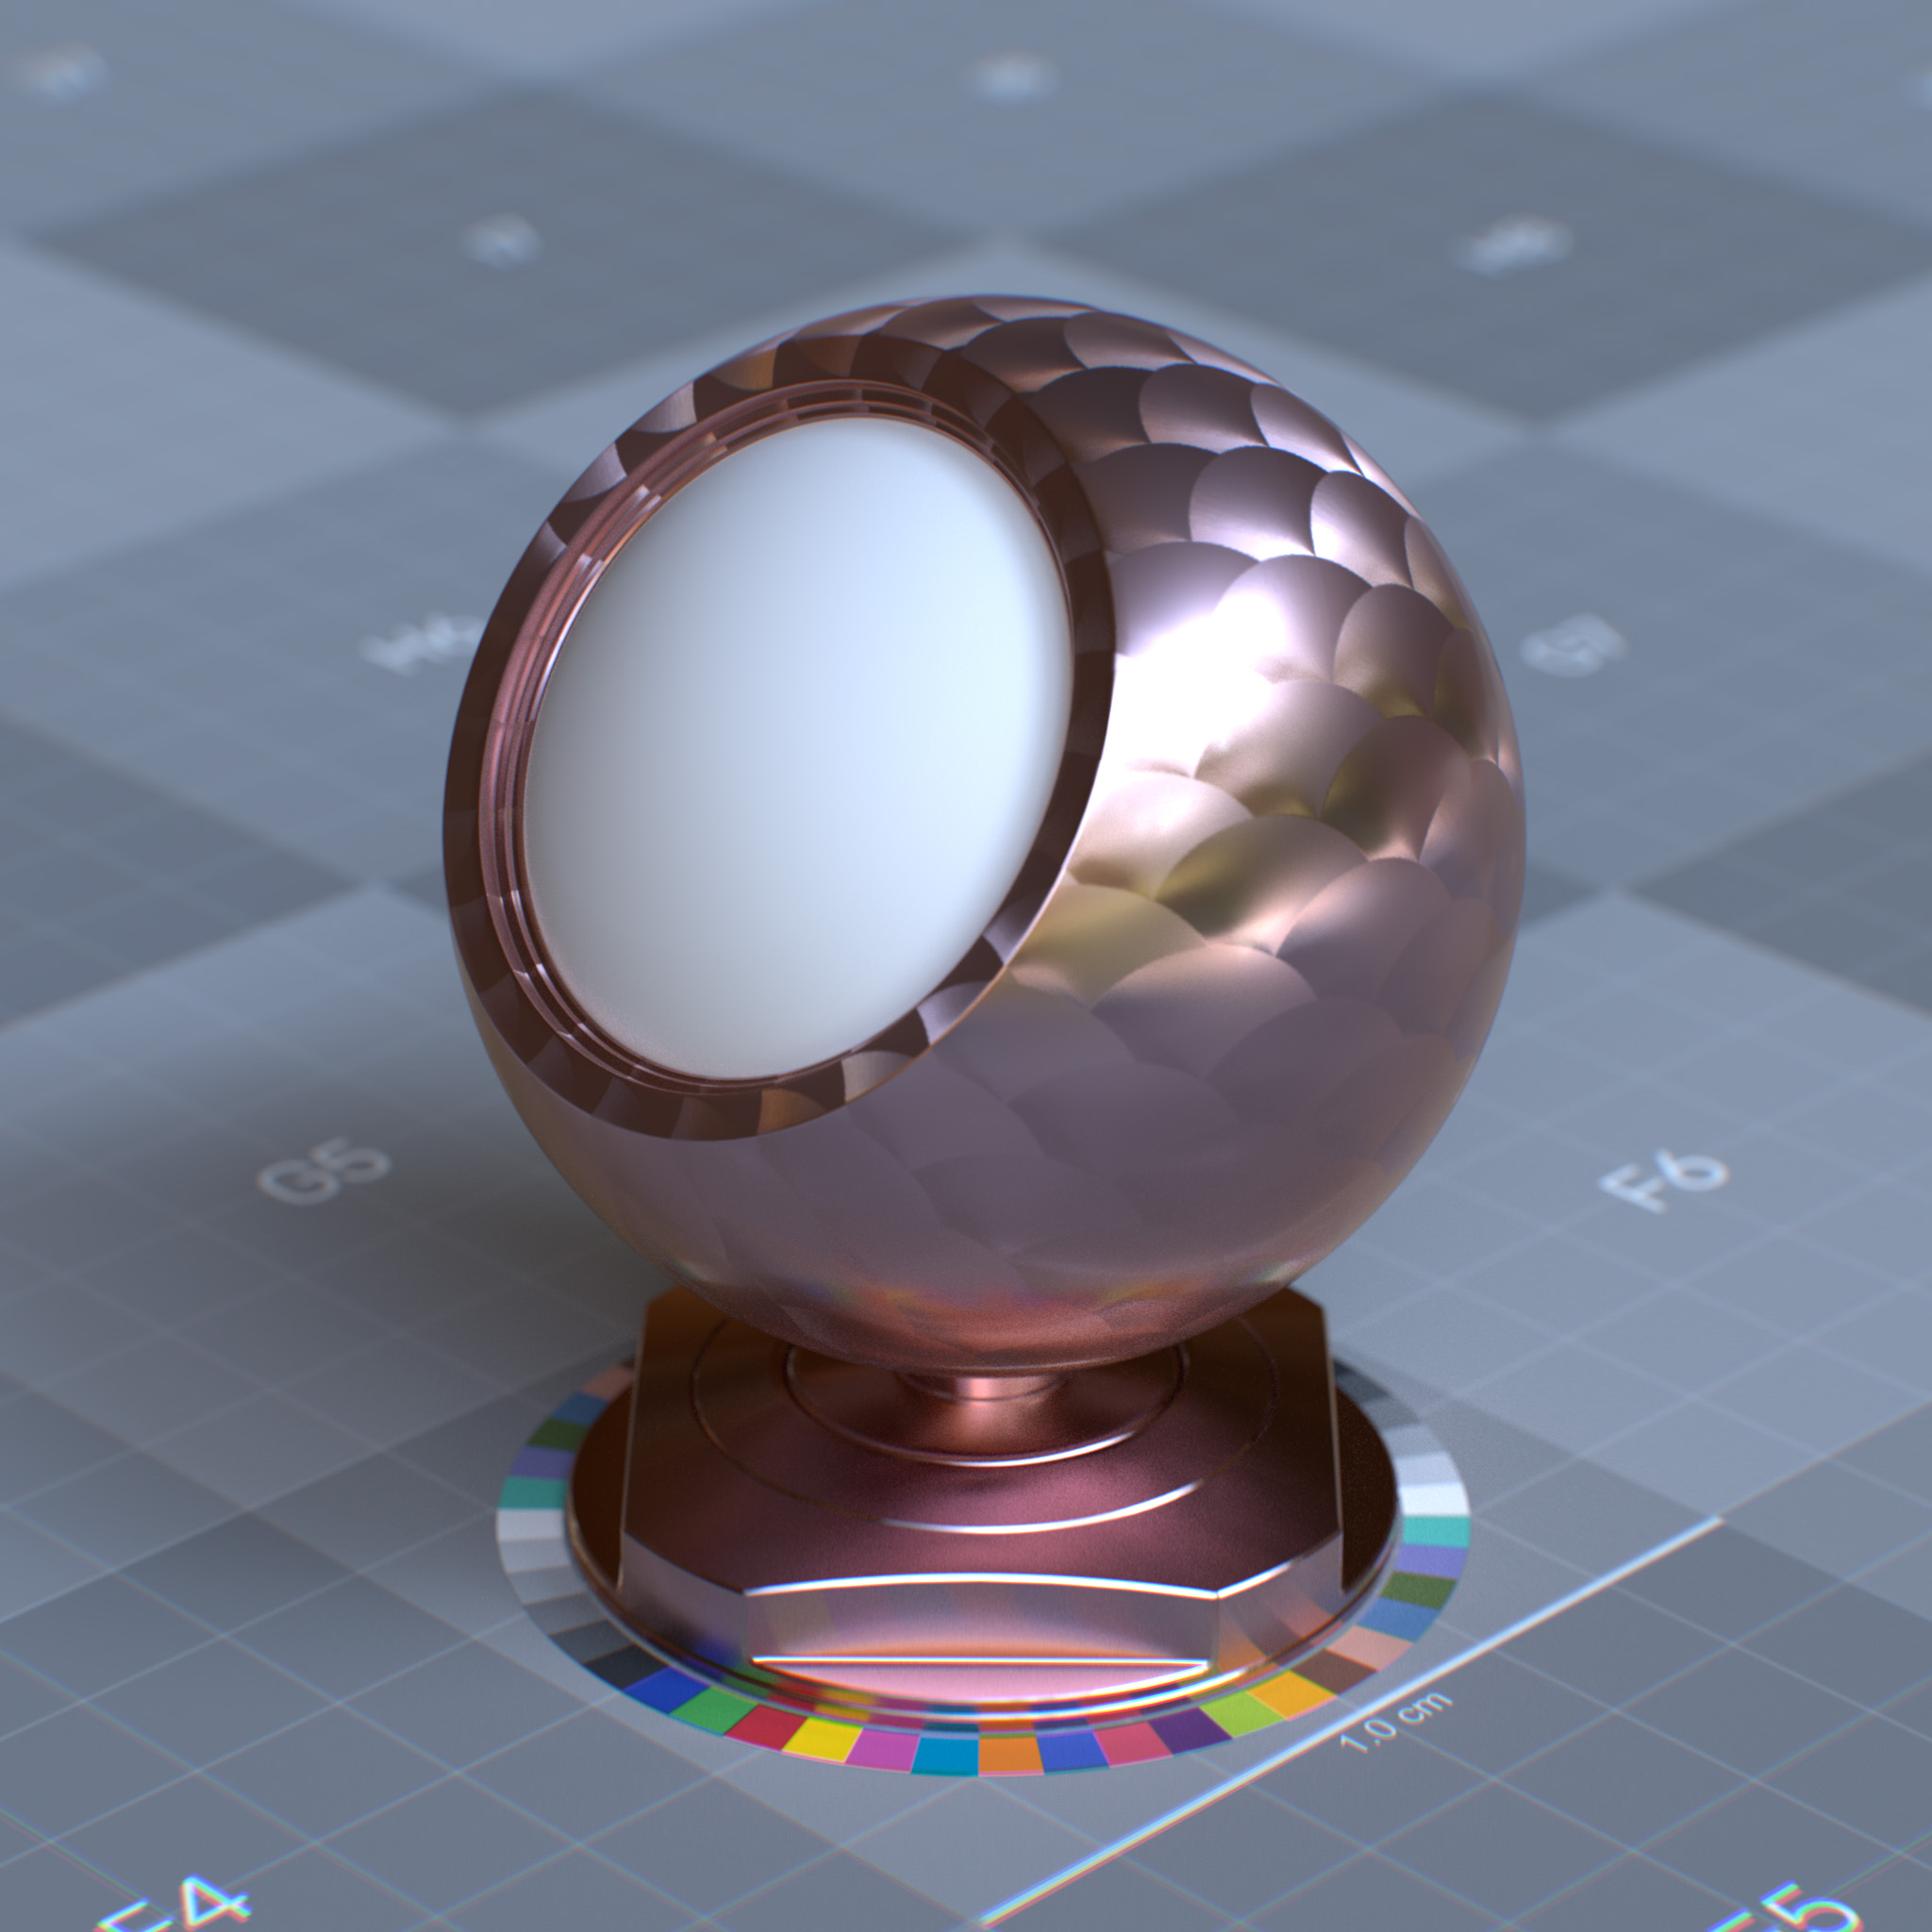 rtx_material_omnisurfacebase_specular_reflection_anisotropy_pattern